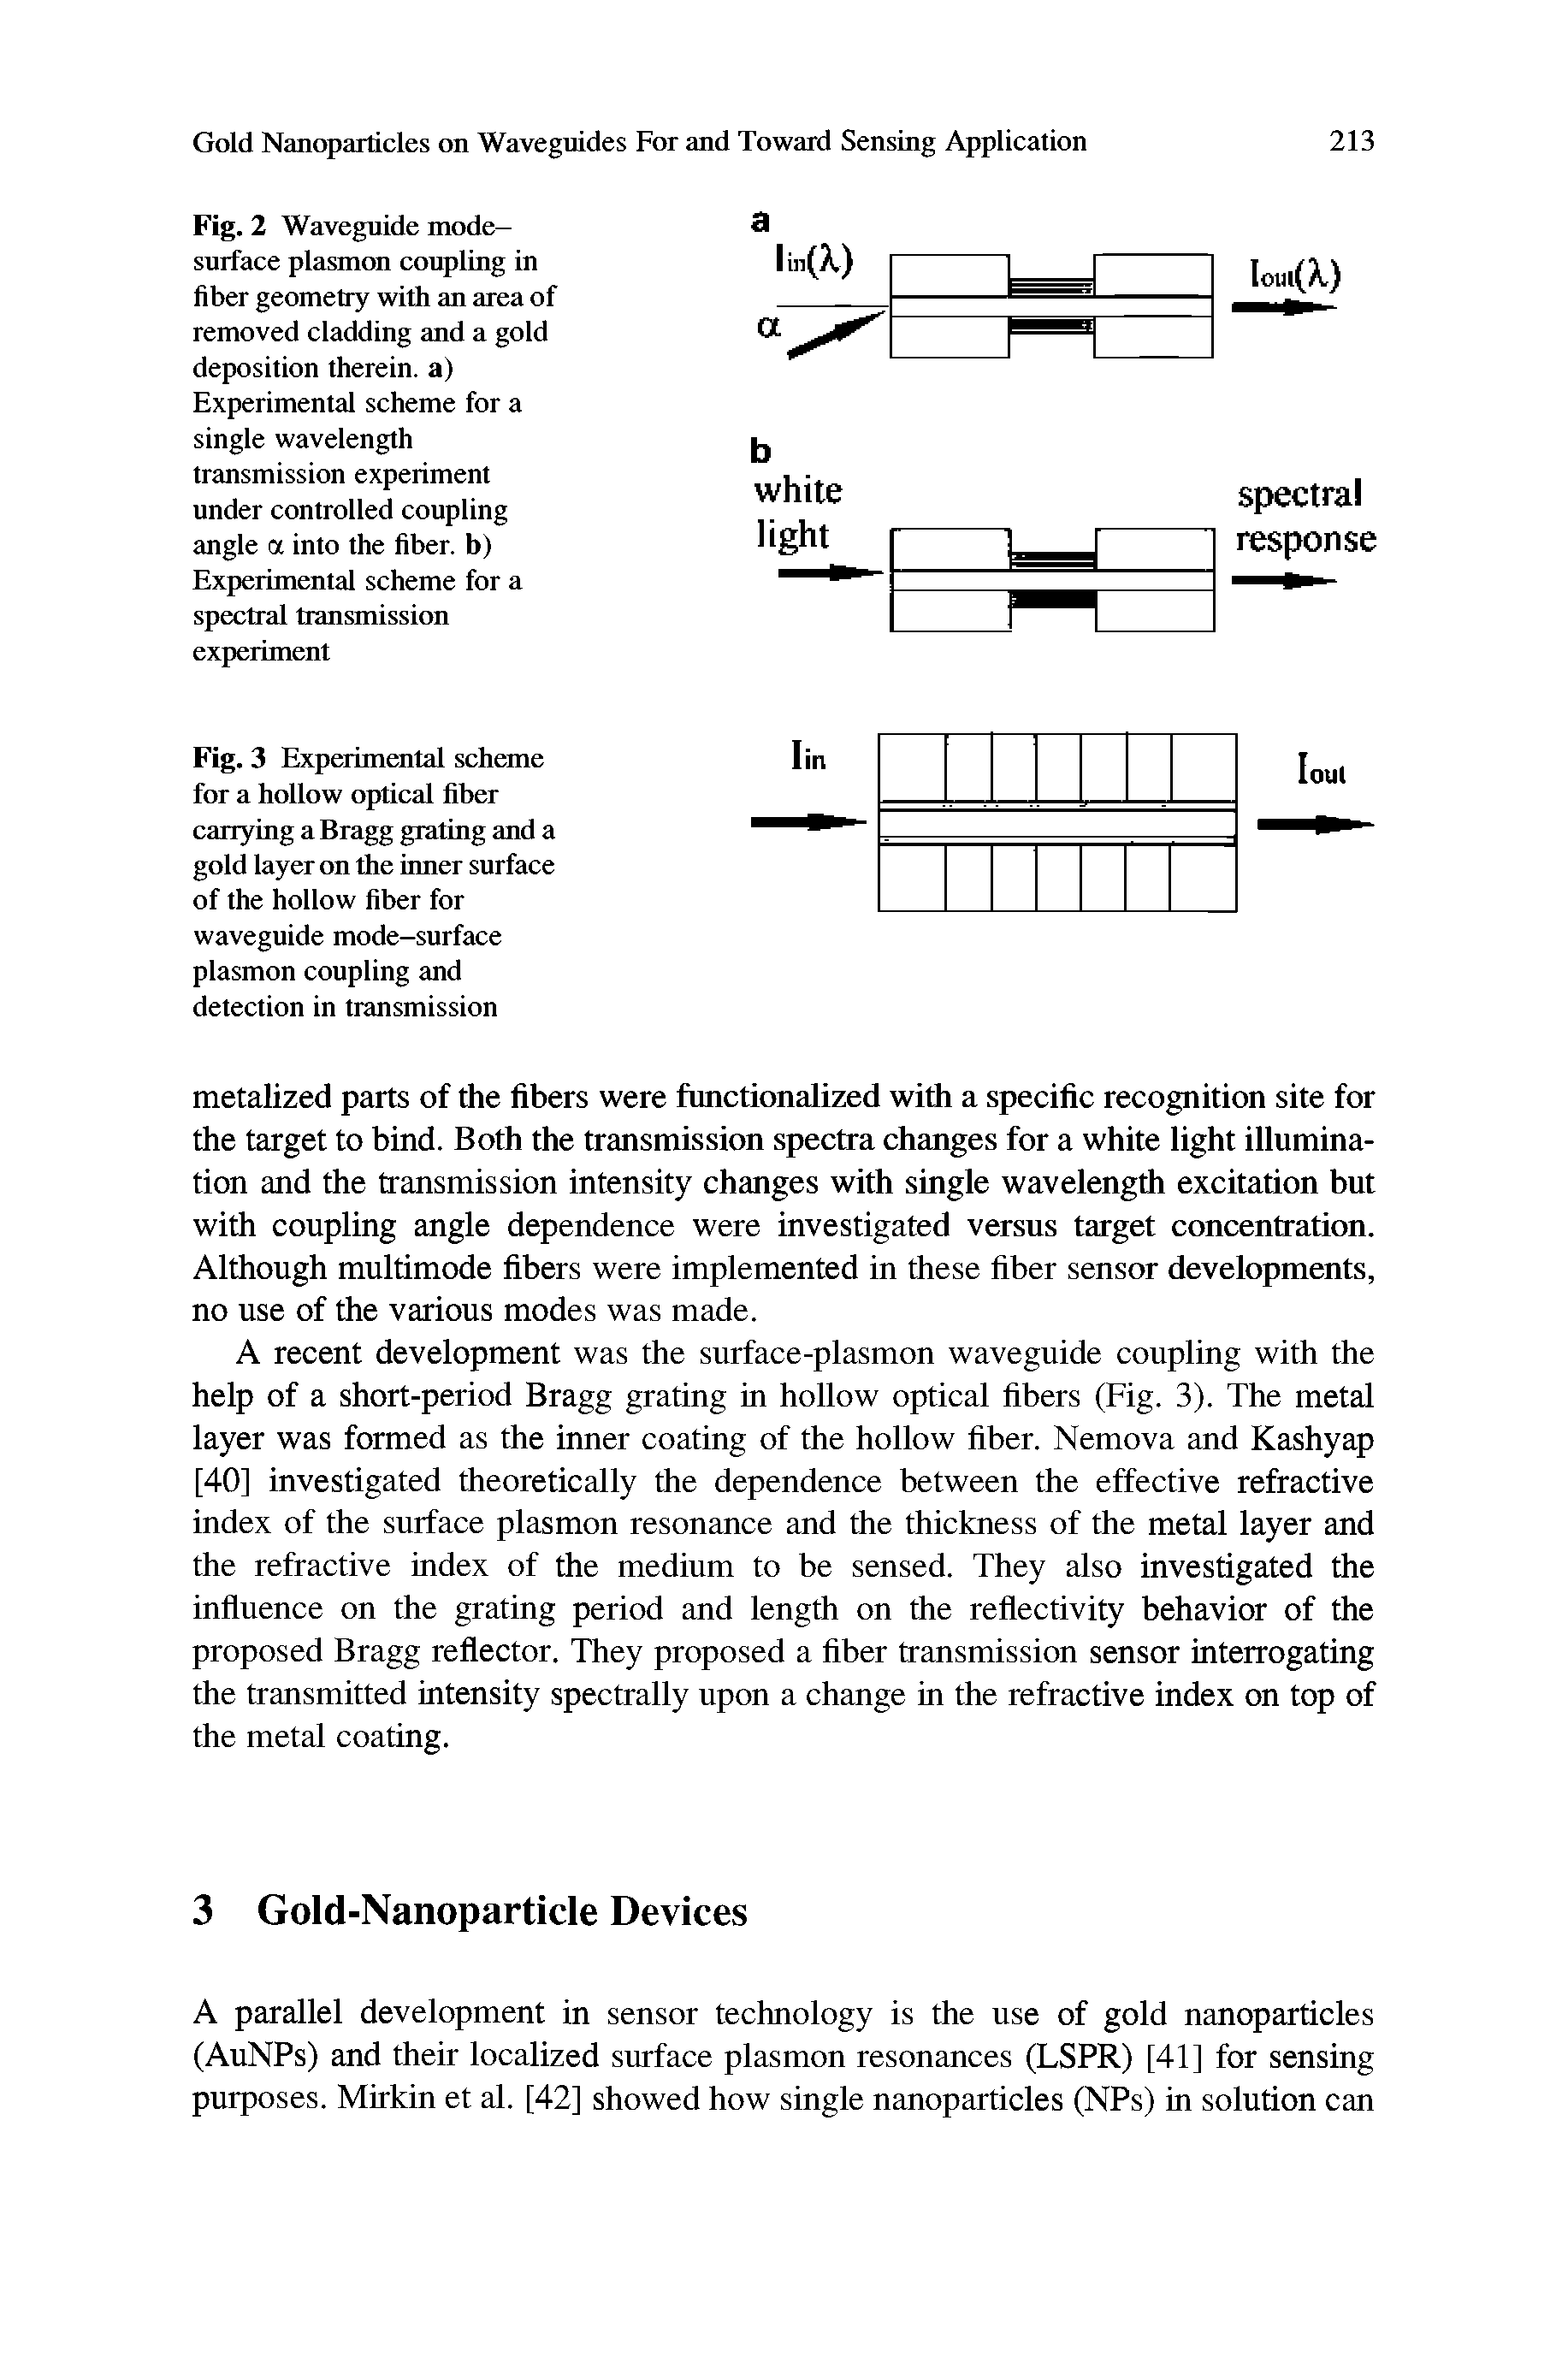 Fig. 2 Waveguide mode-surface plasmon coupling in fiber geometry with an area of removed cladding and a gold deposition therein, a) Experimental scheme for a single wavelength transmission experiment under controlled coupling angle a into the fiber, b) Experimental scheme for a spectral transmission experiment...